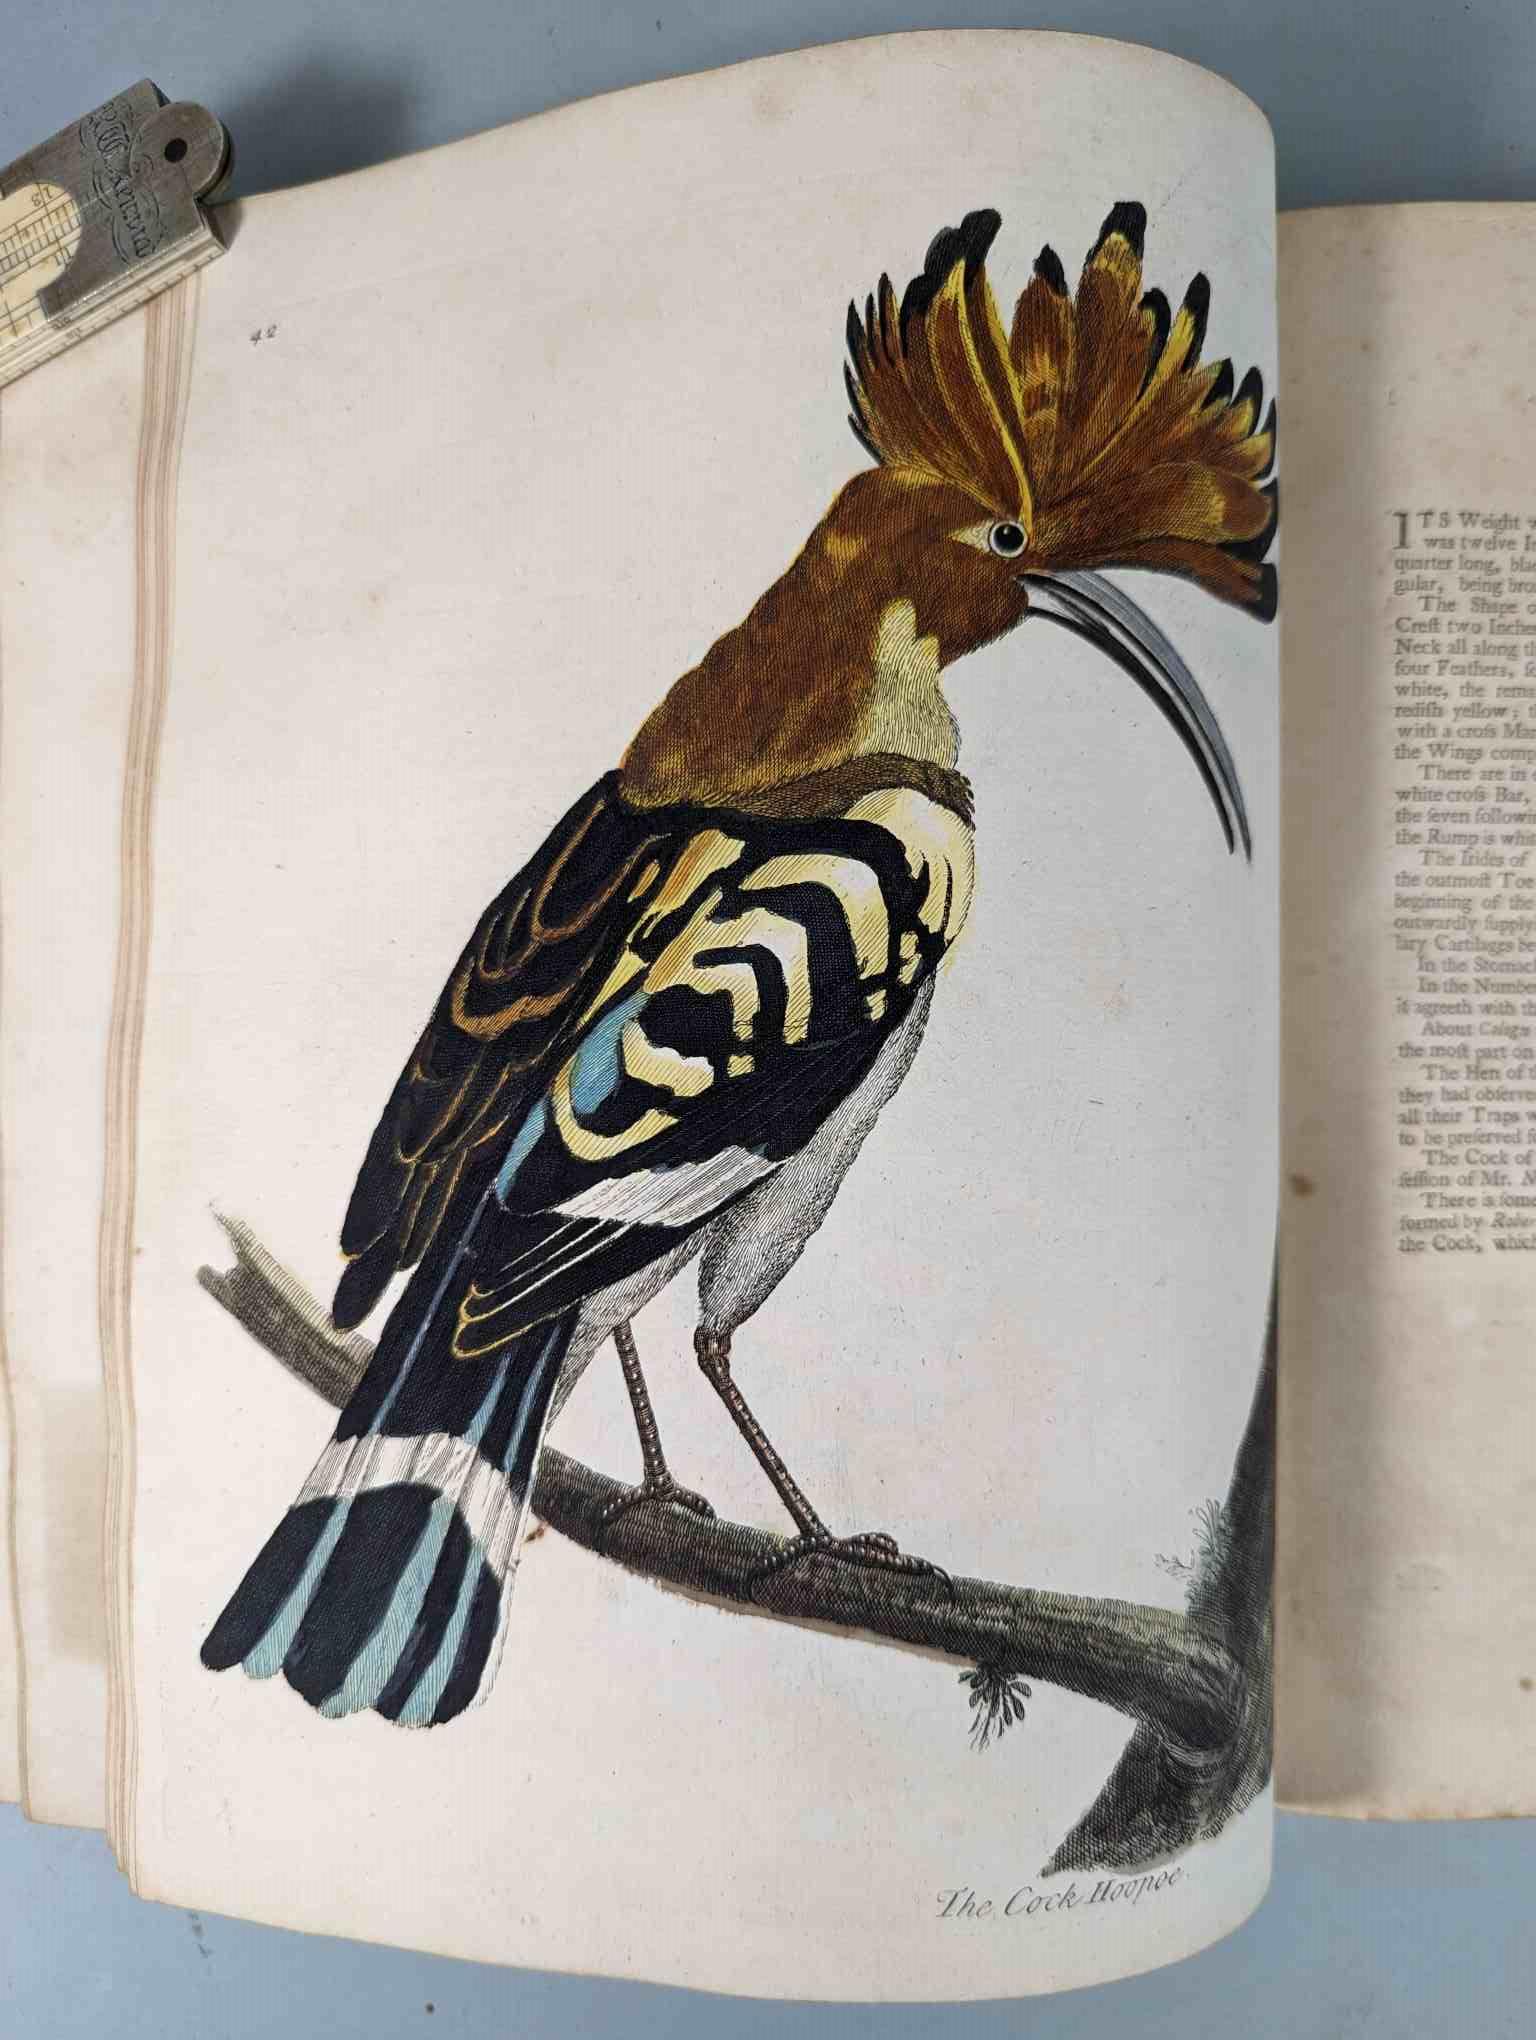 ALBIN, Eleazar. A Natural History of Birds, to which are added, Notes and Observations by W. - Image 147 of 208